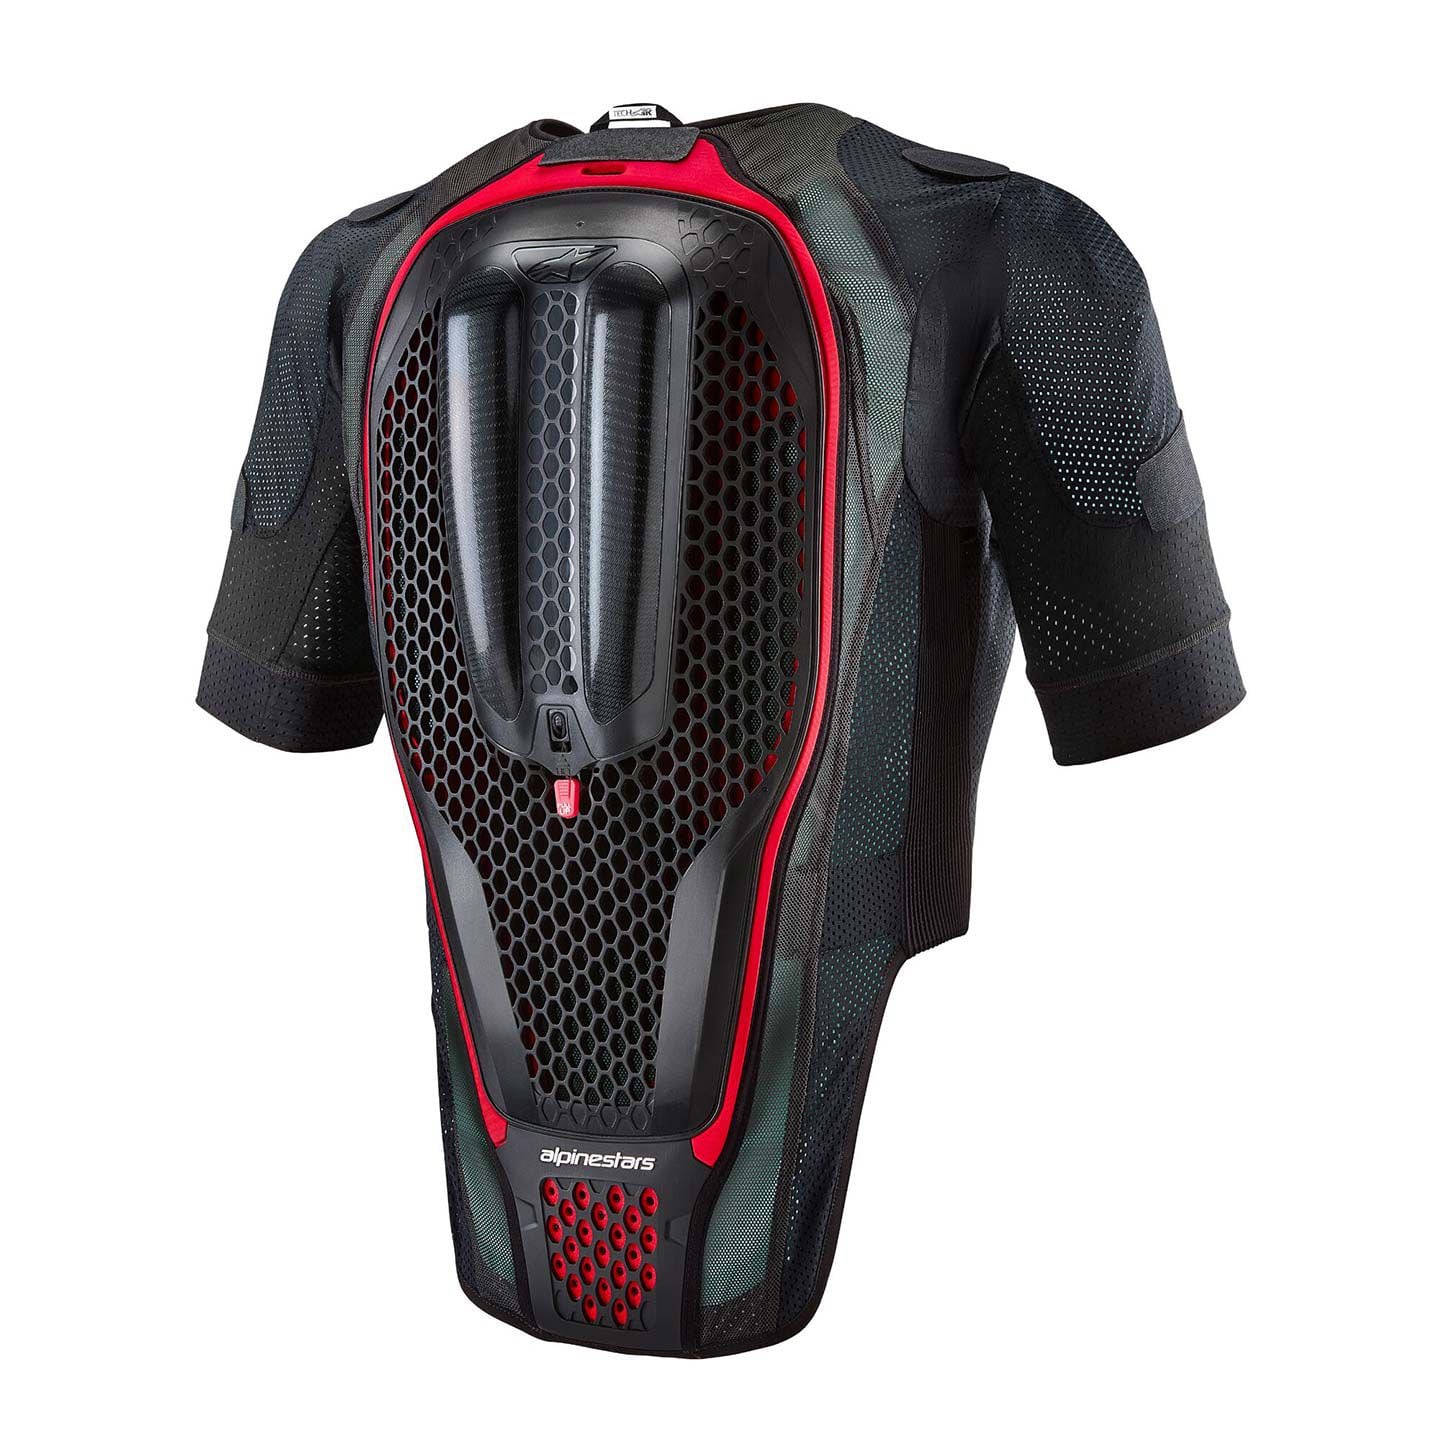 The new Alpinestars Tech-Air 7x airbag system is available now, starting at $999.95.